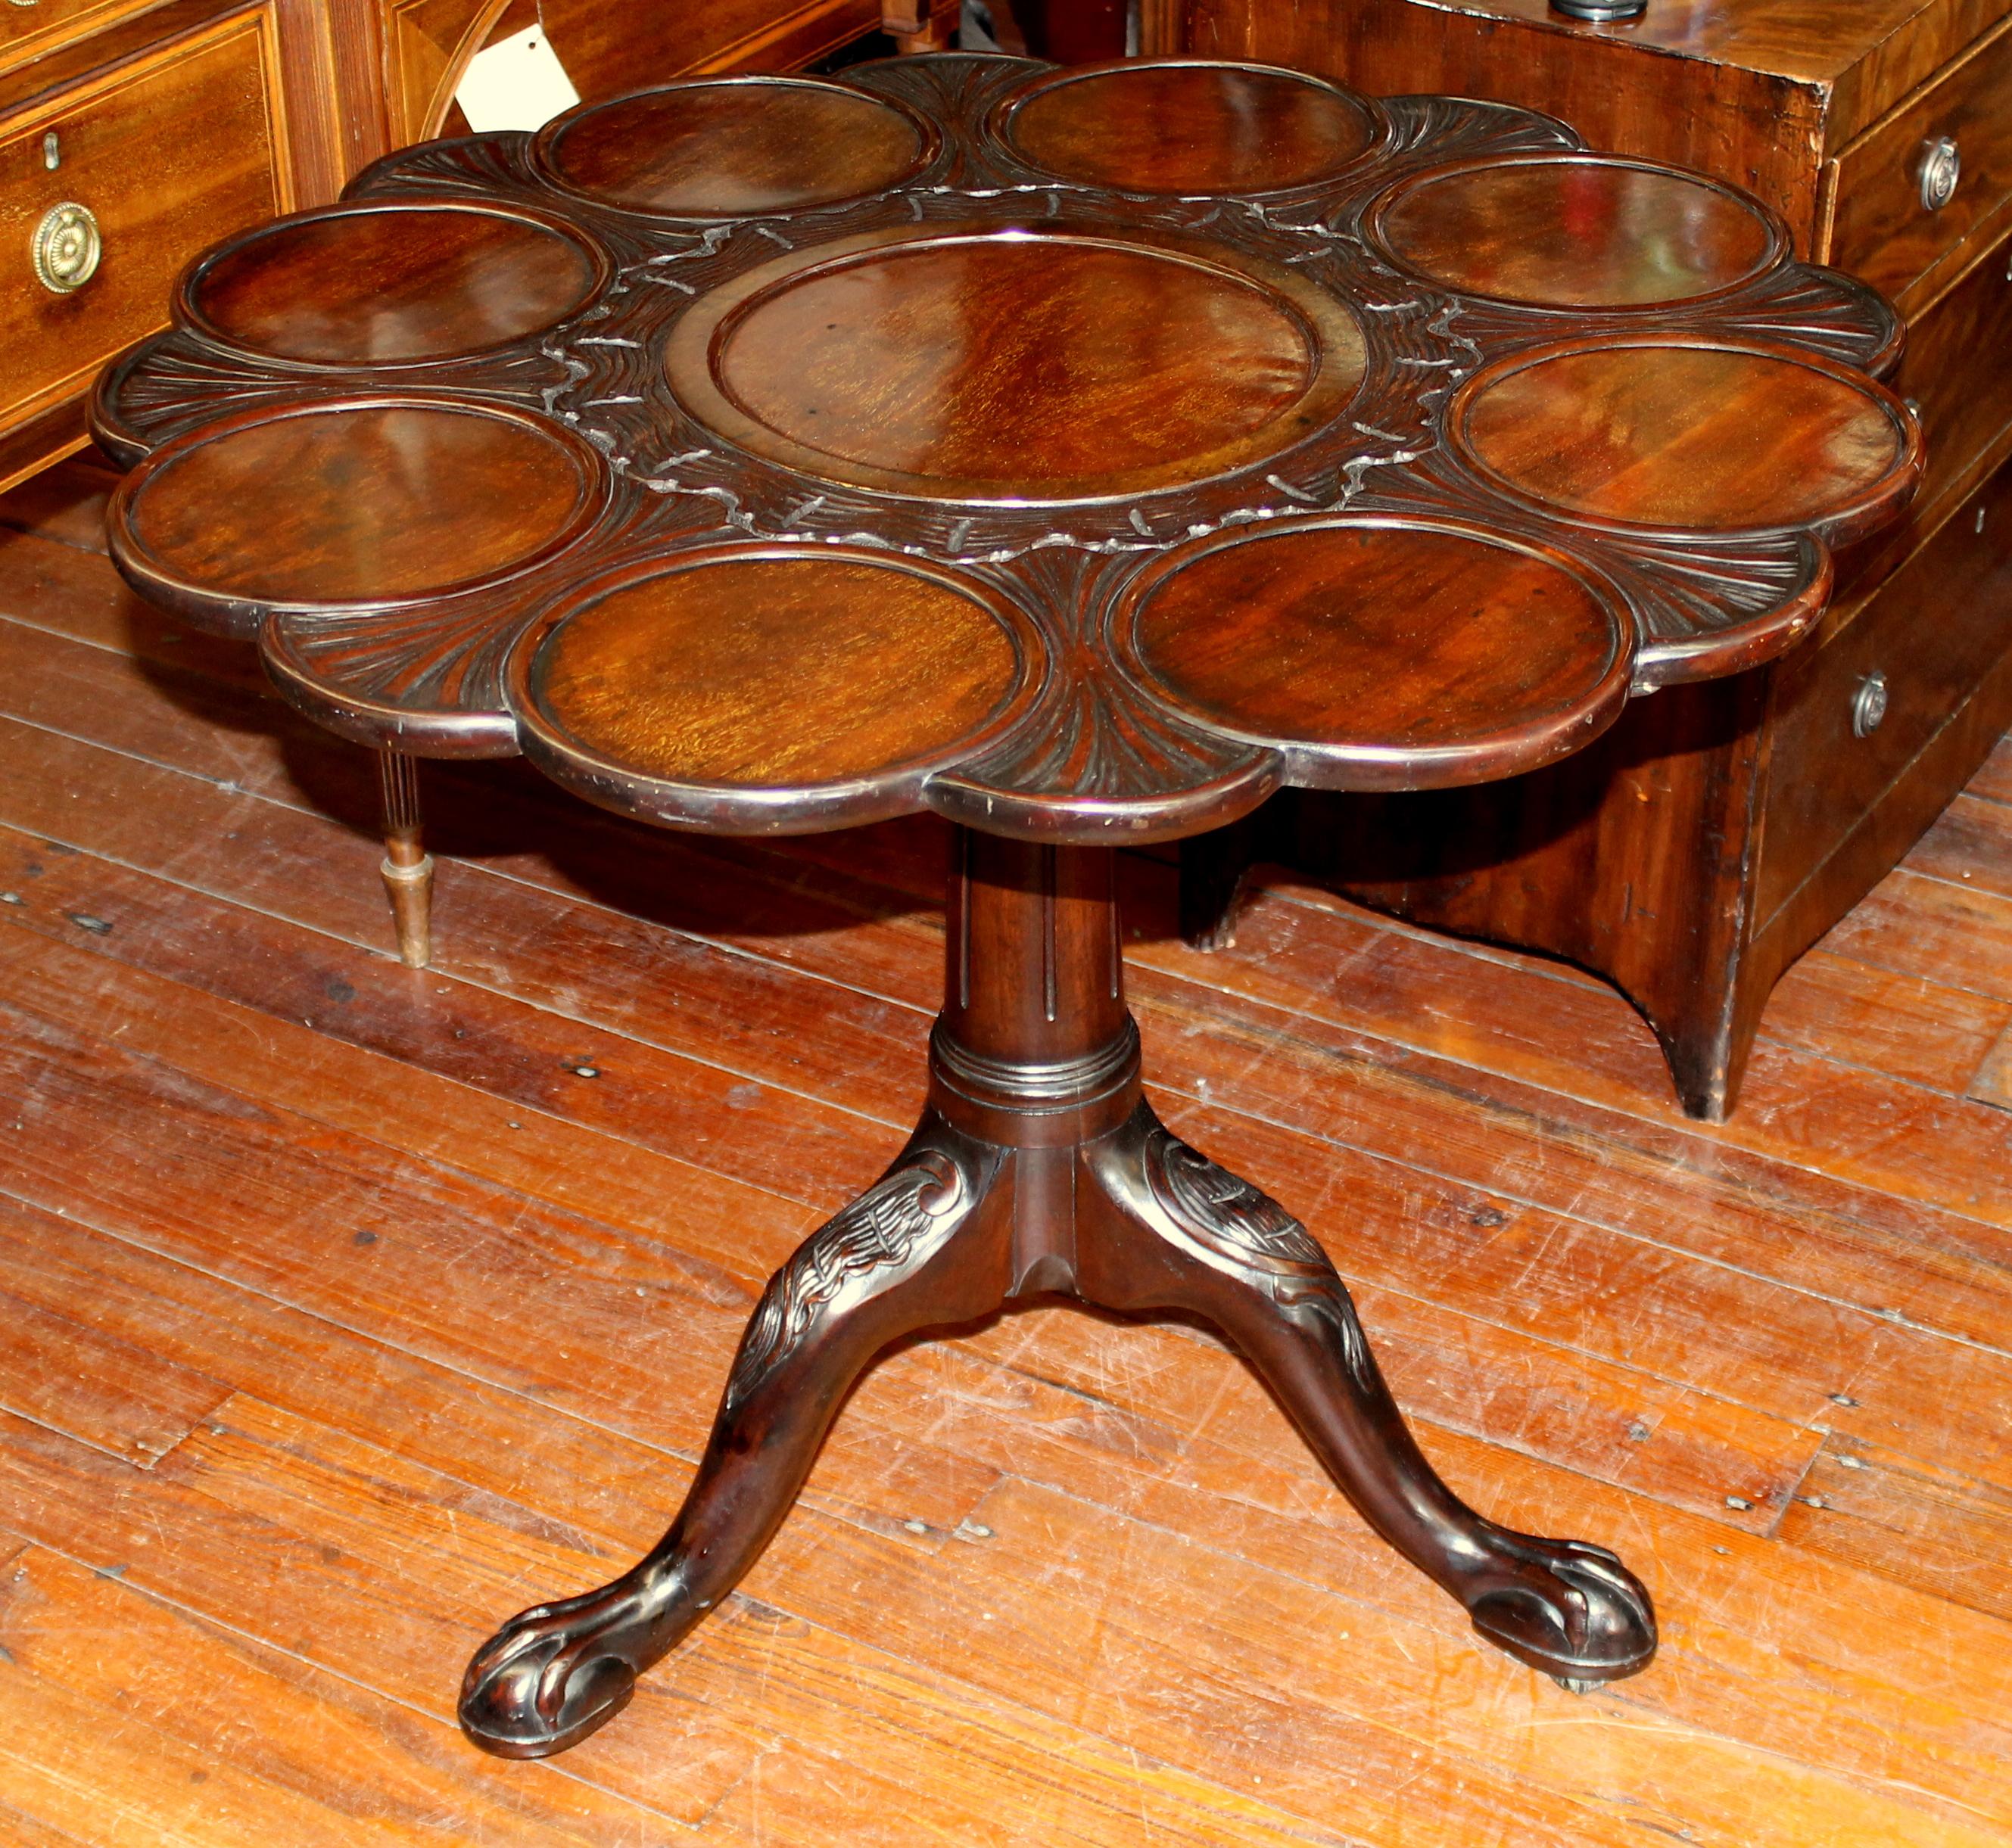 Finest quality antique English George III Chippendale style hand carved solid mahogany tilt-top supper Table with rare original hand-hewn mahogany birdcage support. Fabulous hand carved tilt-top supper Table with cabriole legs upon ball and claw pad